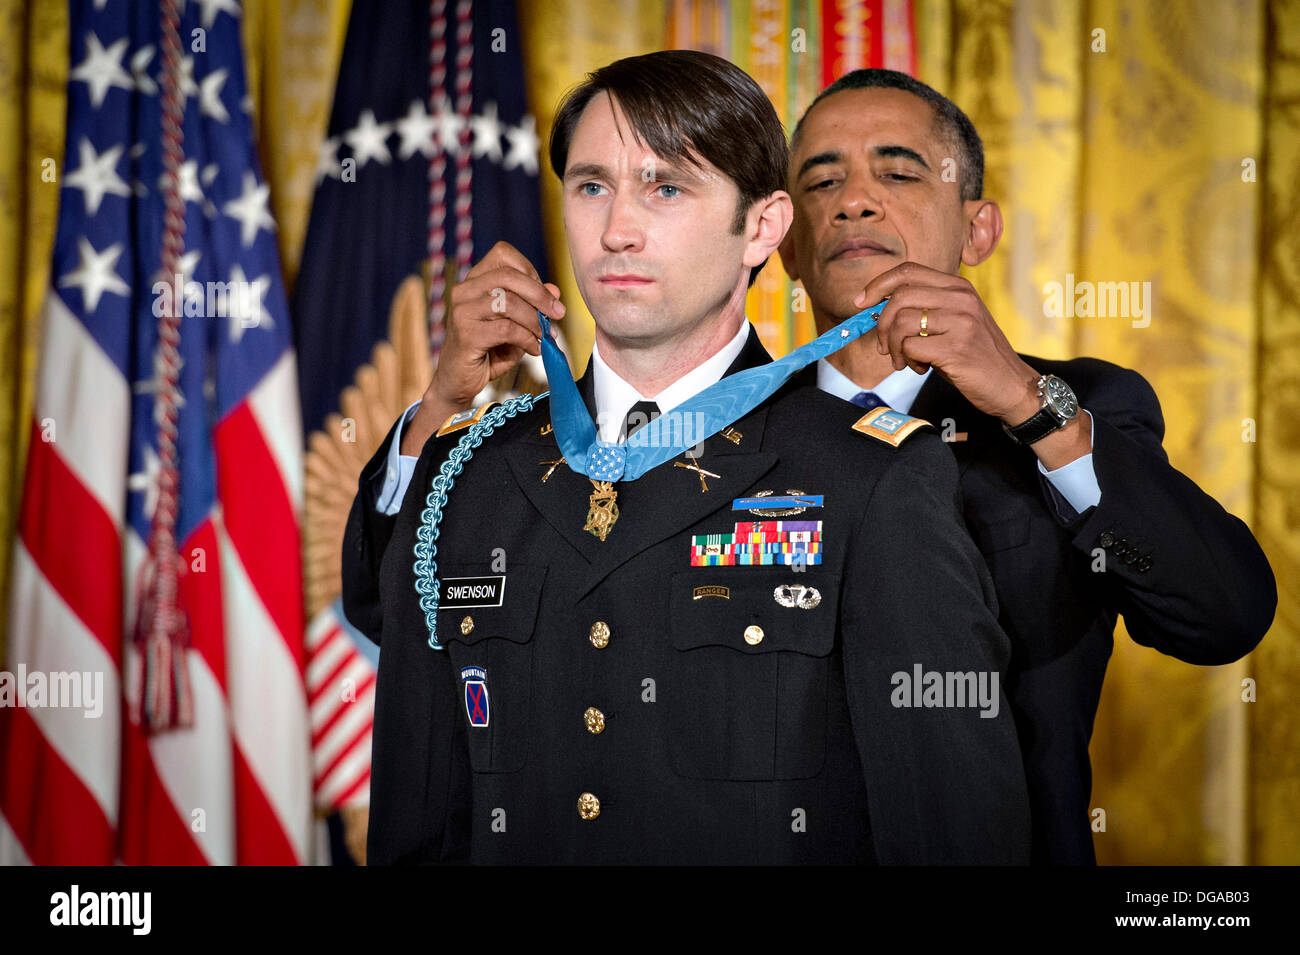 Former US Army Capt. William D. Swenson receives the Medal of Honor from President Barack Obama during a ceremony in the East Room of the White House October 15, 2013 in Washington, DC. The Medal of Honor is the nation's highest military honor. Stock Photo